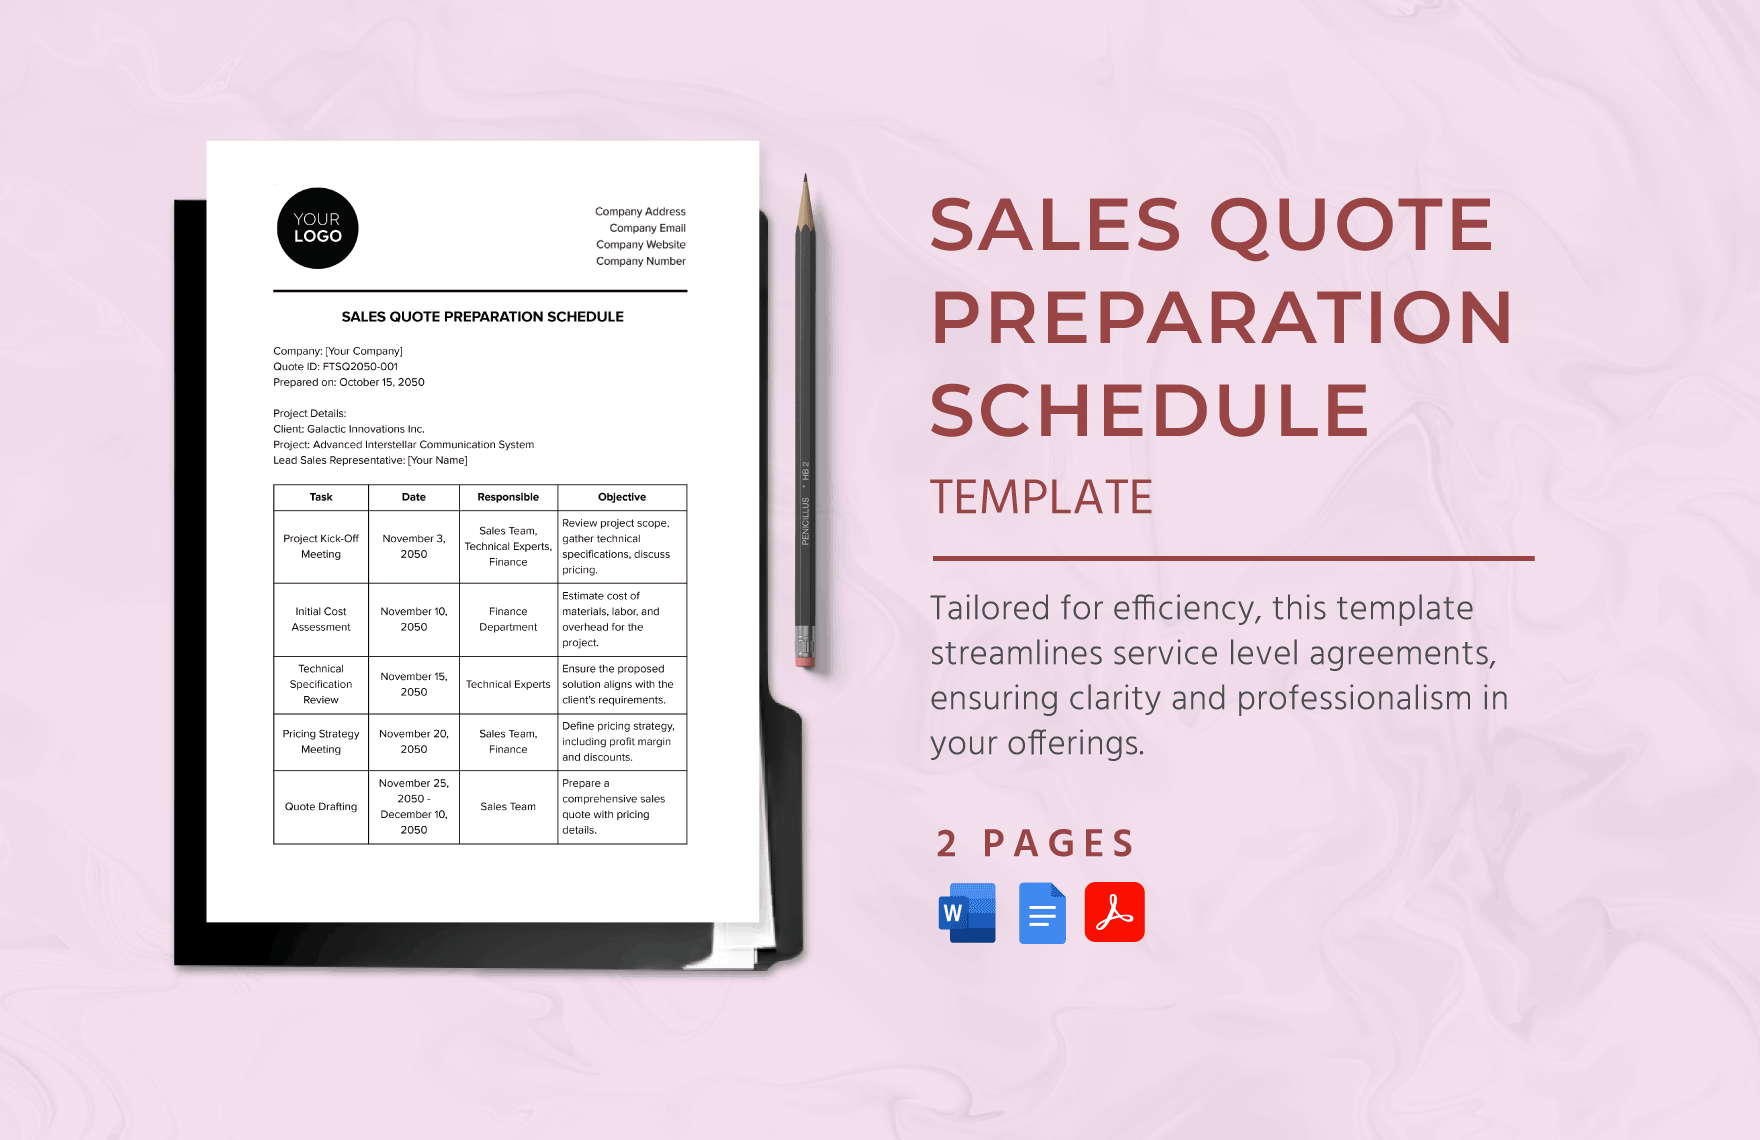 Sales Quote Preparation Schedule Template in Word, Google Docs, PDF